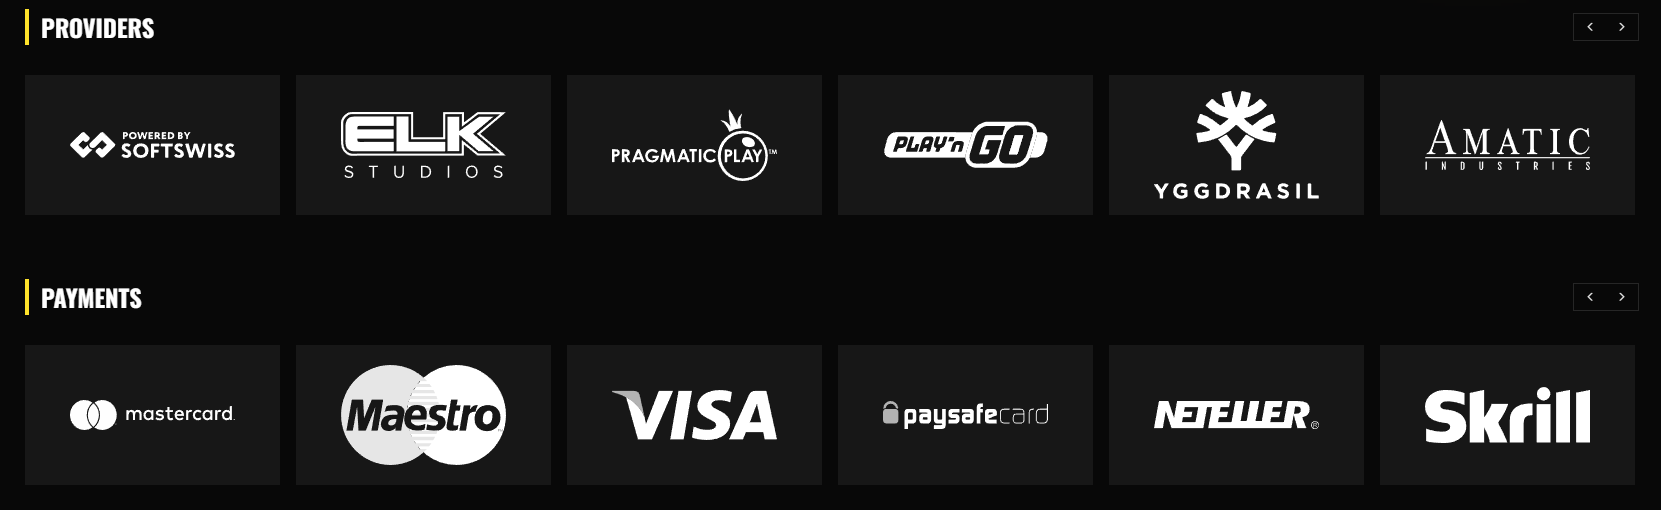 Fight Club Casino Providers and Payment Options